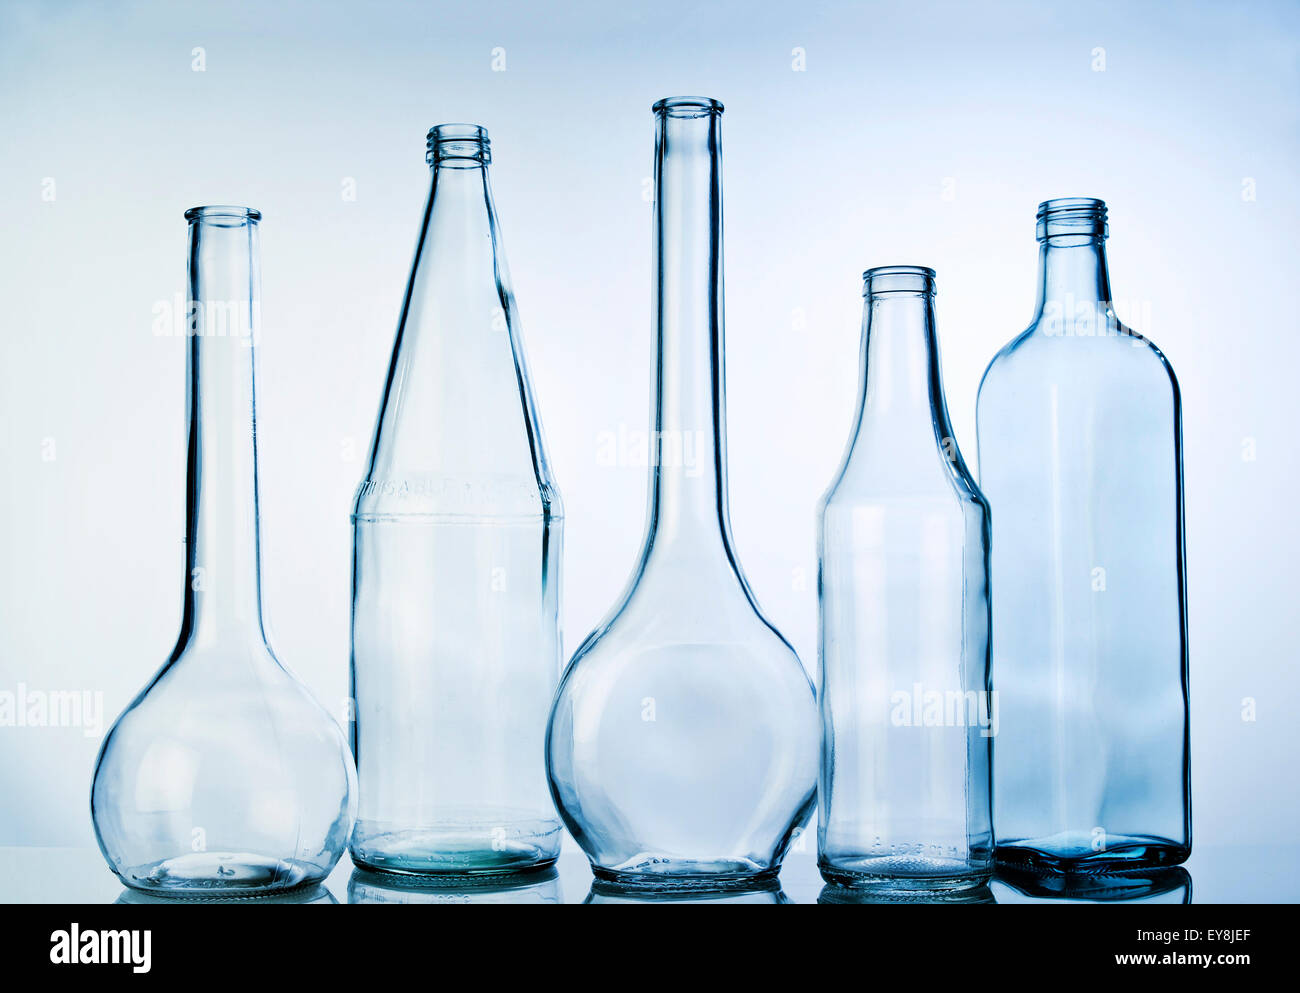 Five glass bottles in a row Stock Photo